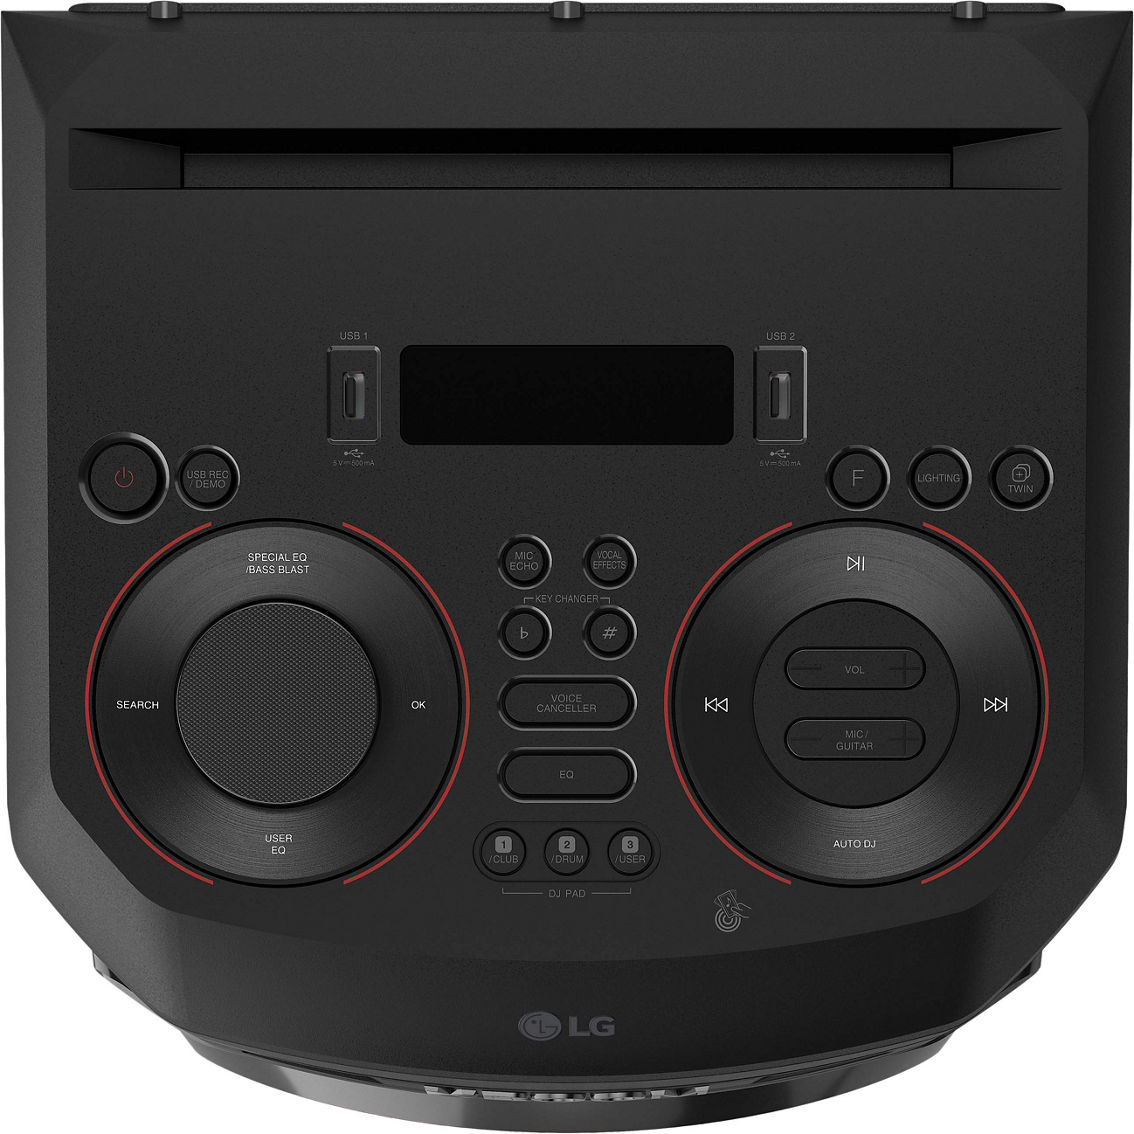 LG RNC9 XBOOM Audio System - Image 4 of 4